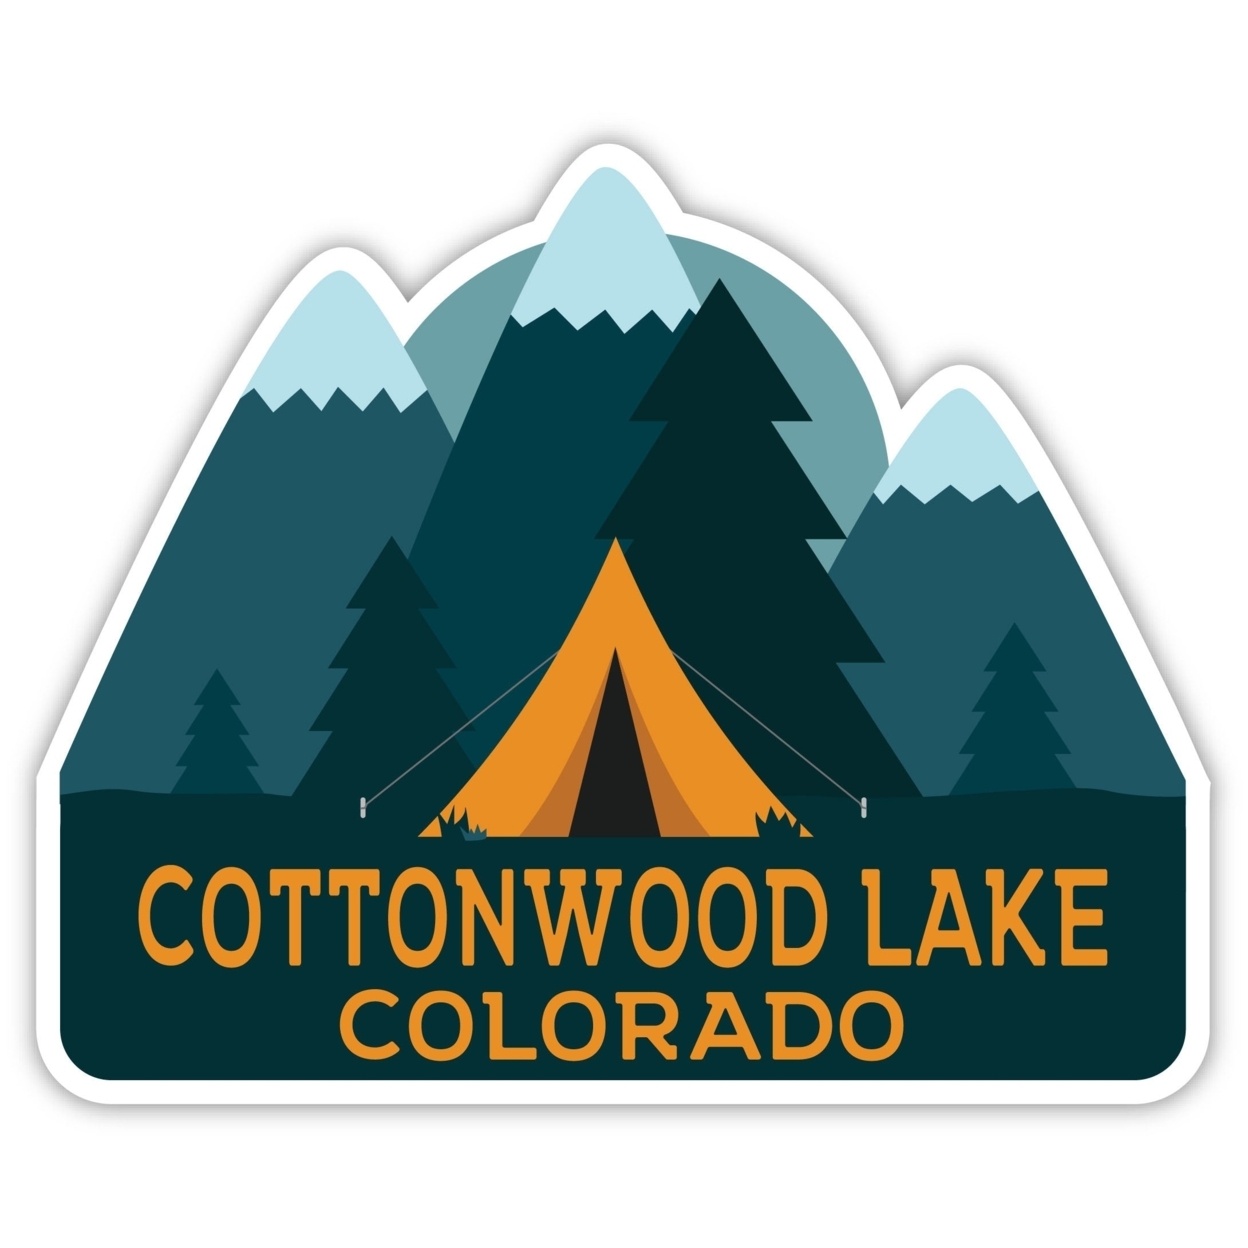 Cottonwood Lake Colorado Souvenir Decorative Stickers (Choose Theme And Size) - 4-Pack, 10-Inch, Great Outdoors